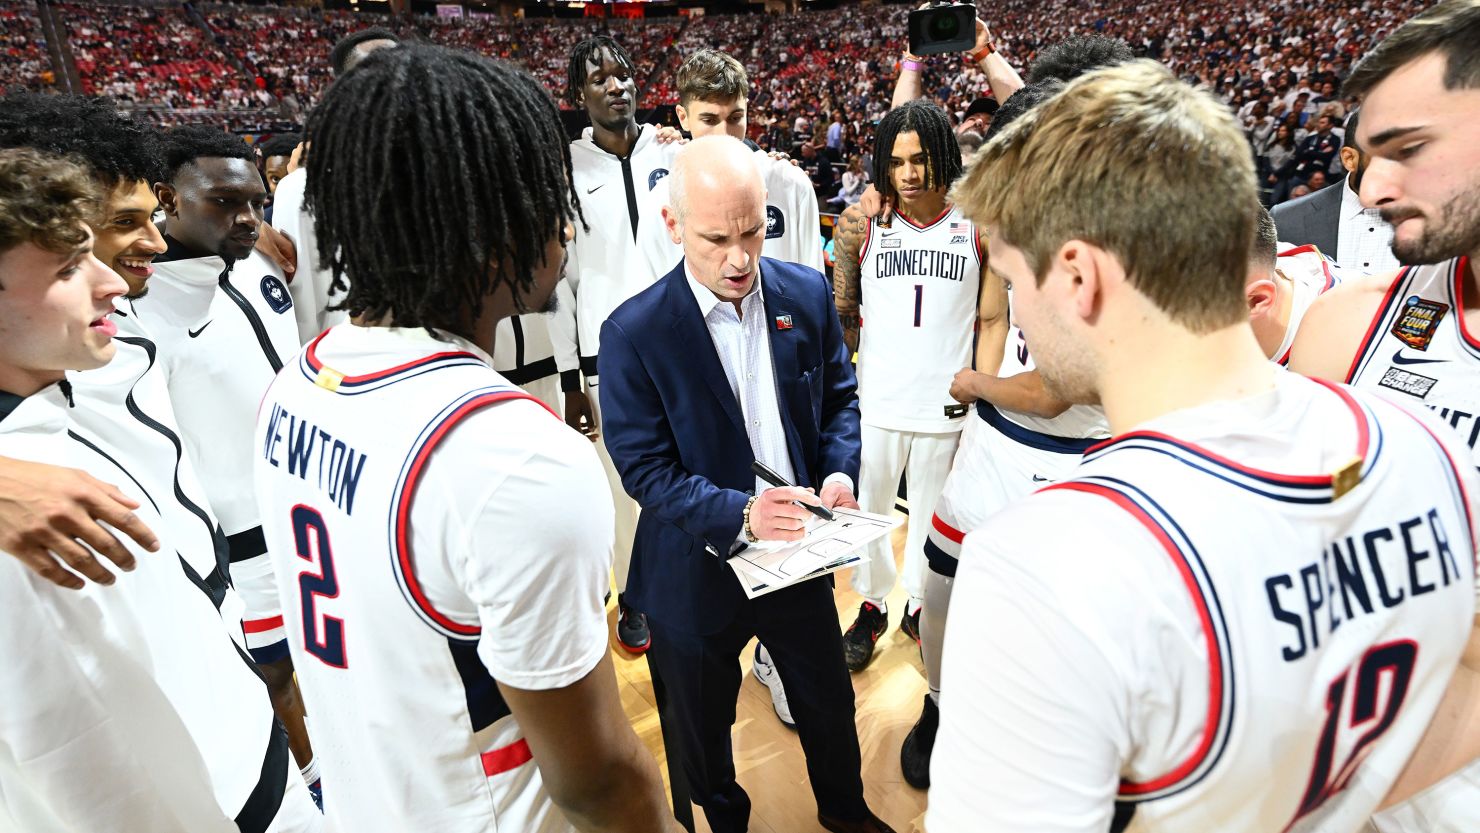 Head coach Dan Hurley of the Connecticut Huskies turned down a $70 million, six-year contract offer from the Los Angeles Lakers.